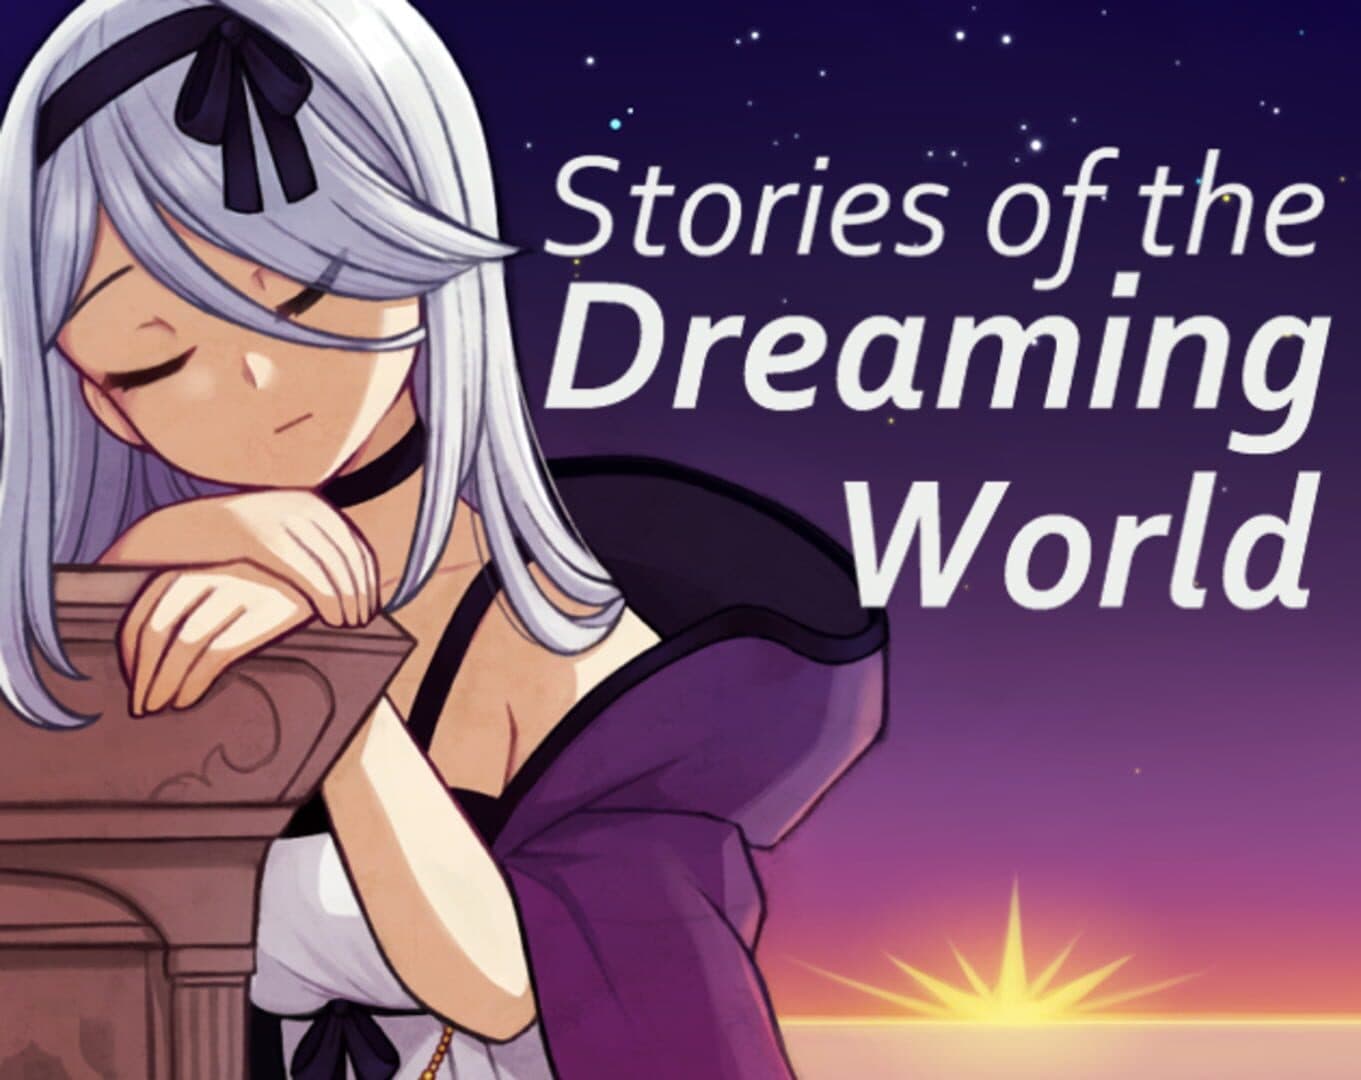 Stories of the Dreaming World cover art